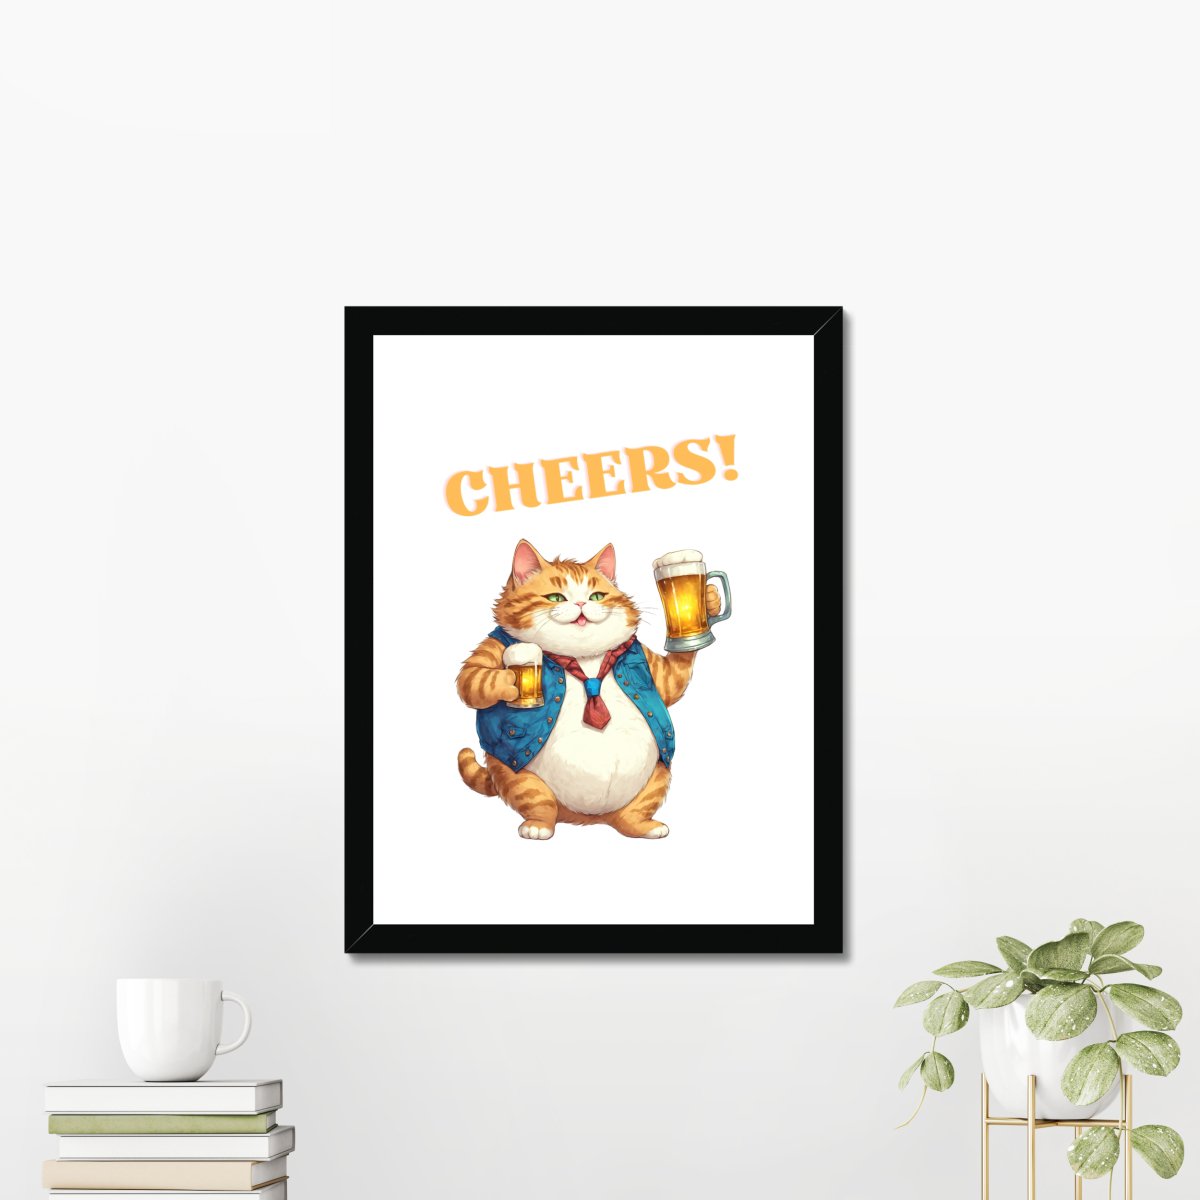 Beer cheers - Art print - Poster - Ever colorful